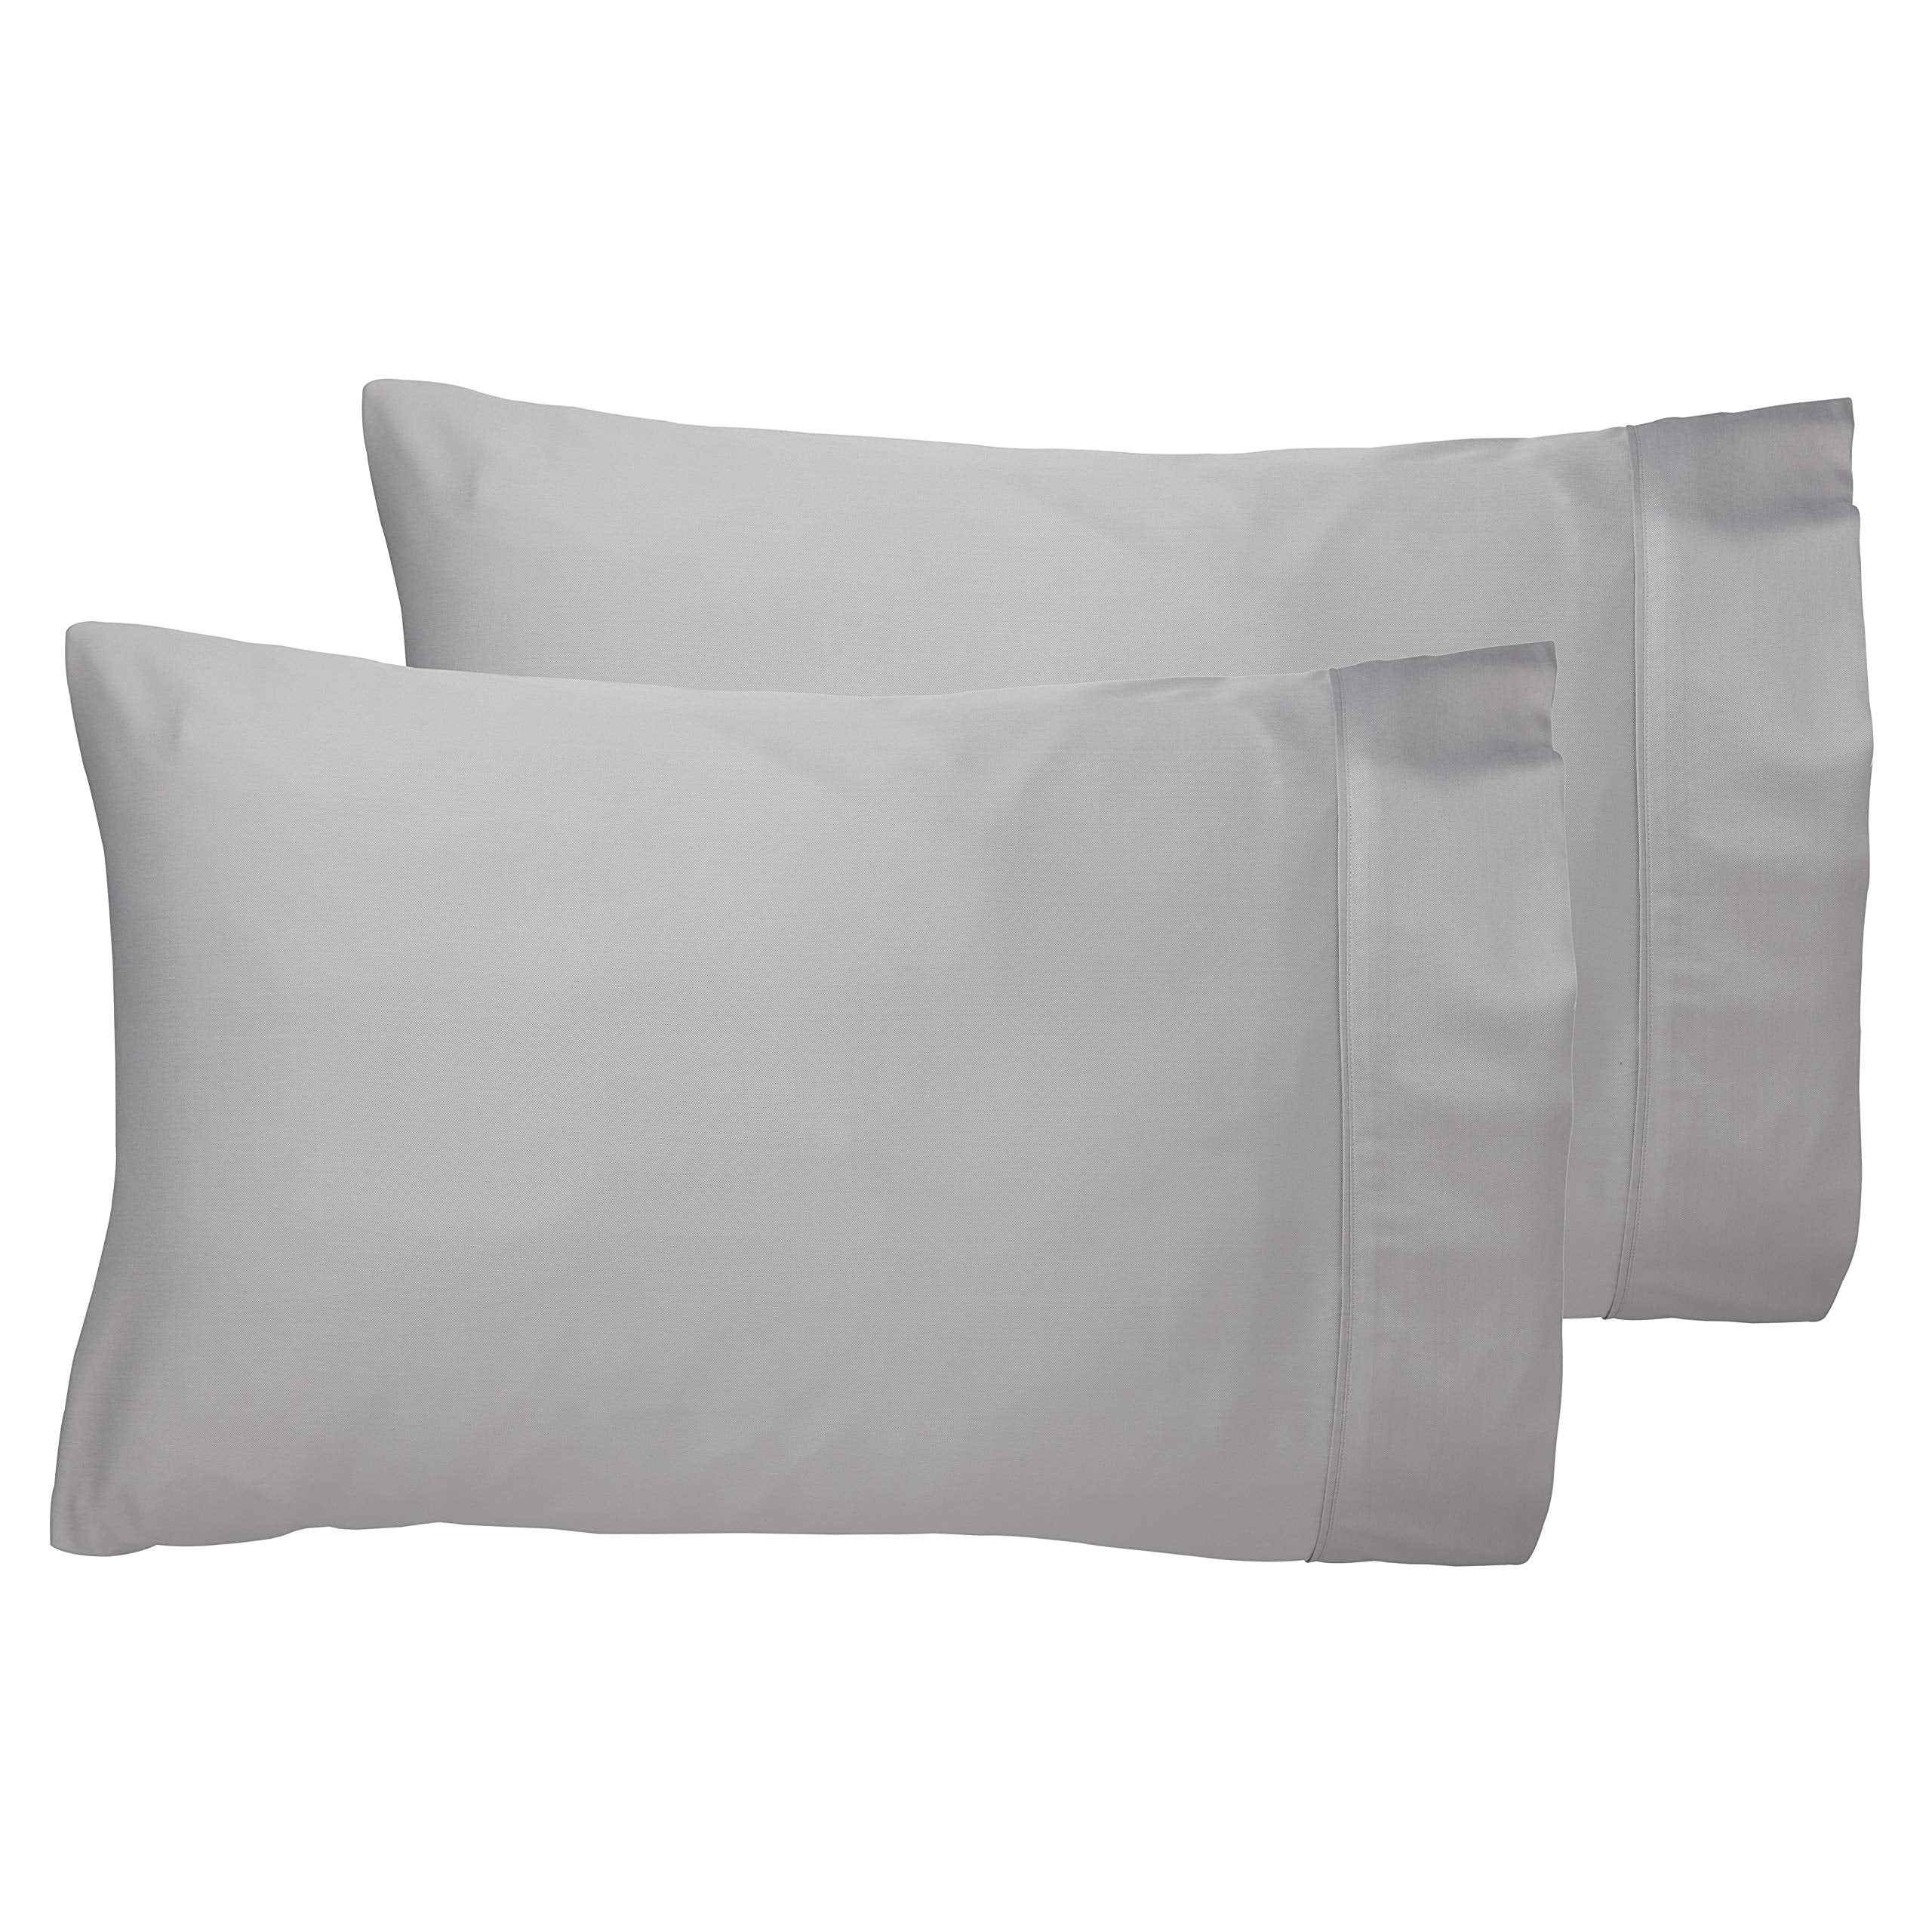 100% Bamboo Bed Linen - Luxury Pillowcases - Housewife Style (Set of 2) (Soft Grey)